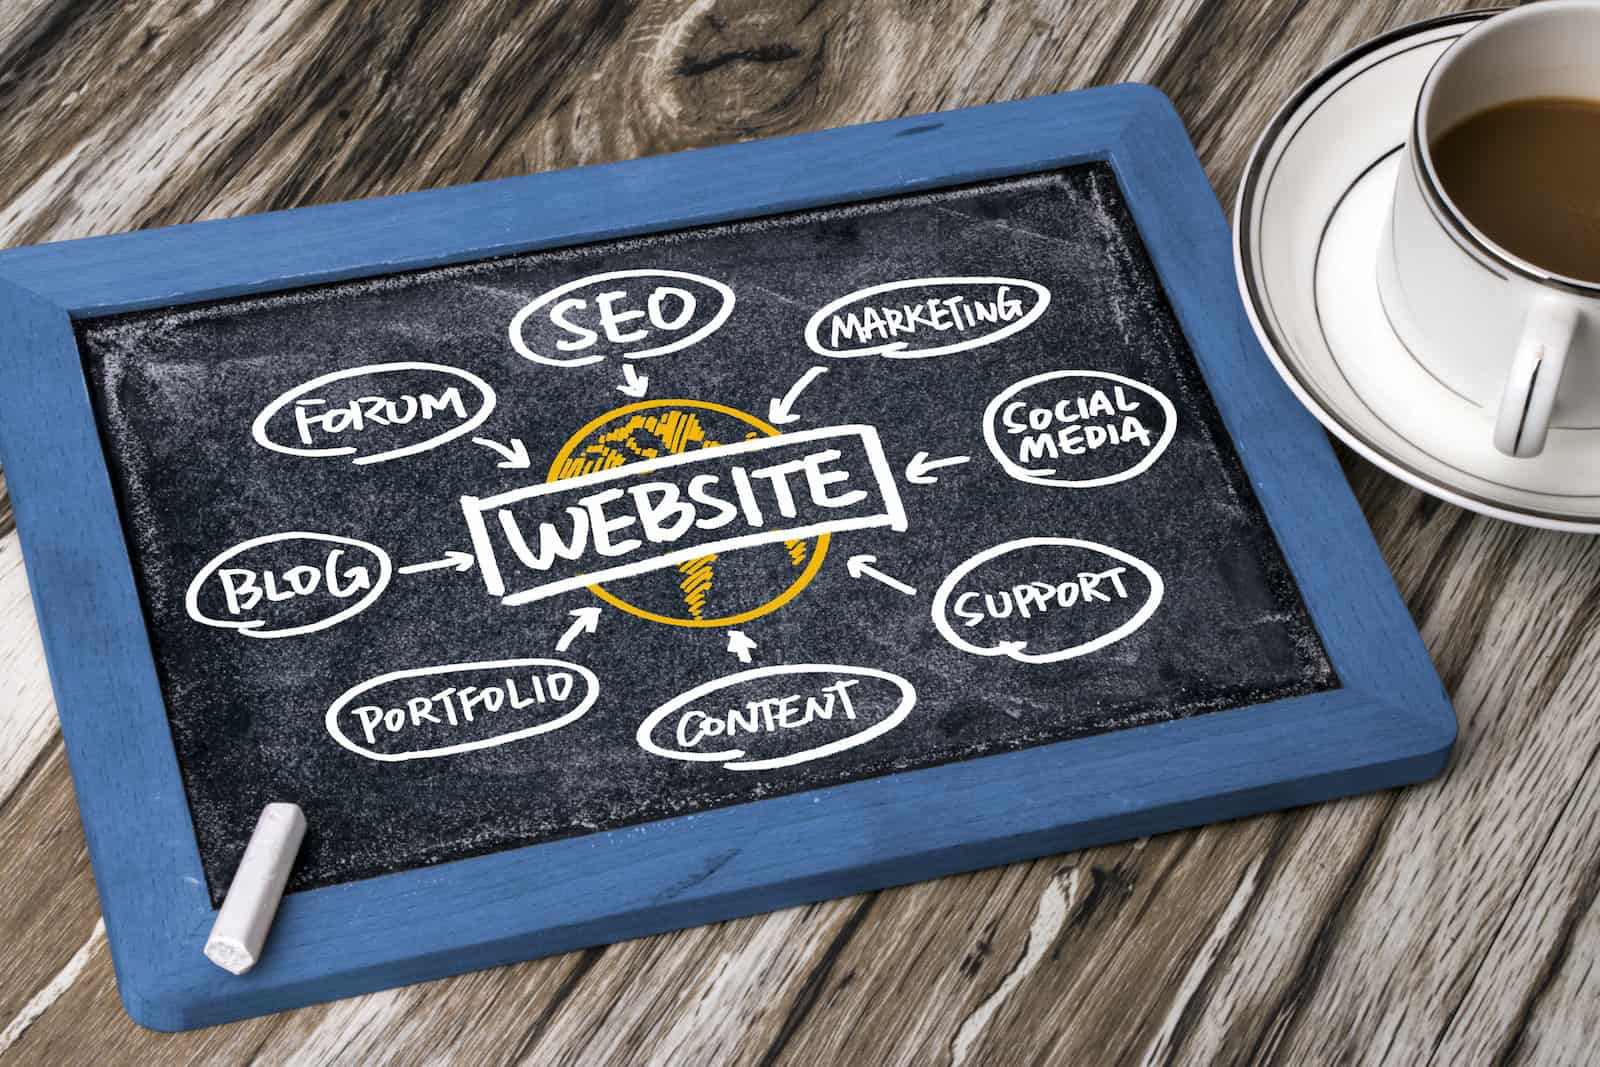 ## 4 Reasons Your Website Is Your Most Important Marketing Tool